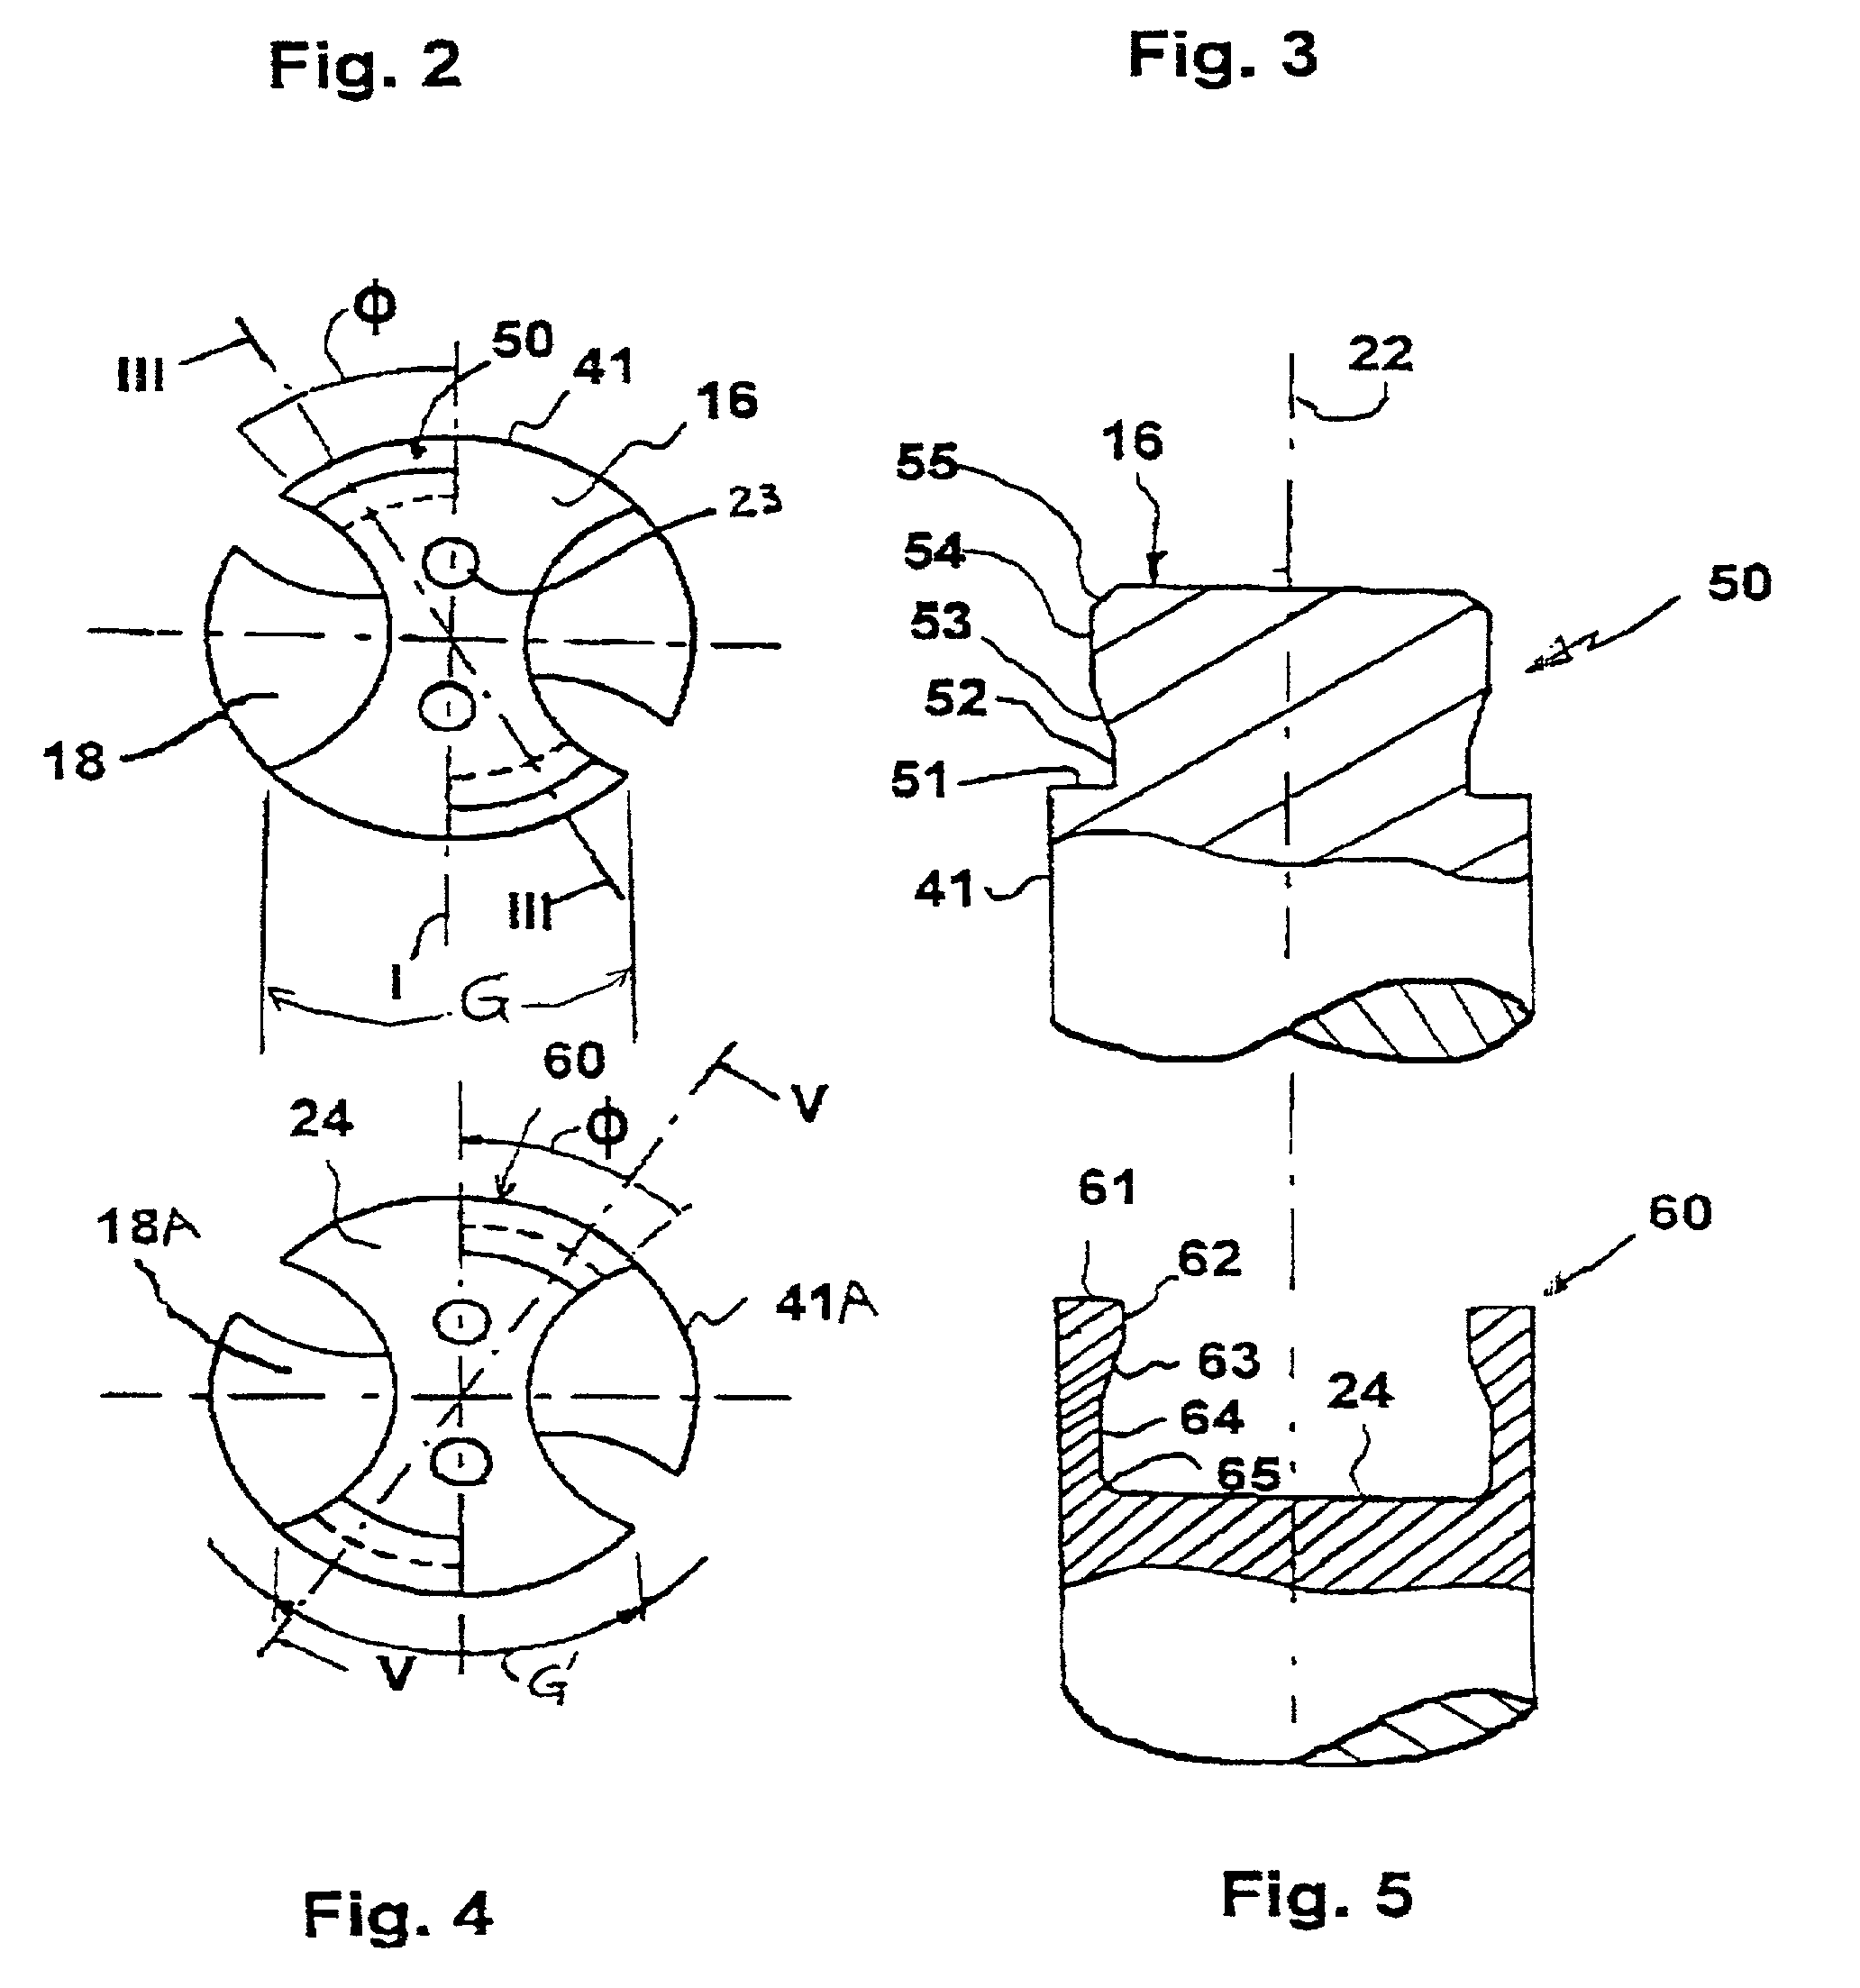 Two-piece rotary metal-cutting tool and method for interconnecting the pieces